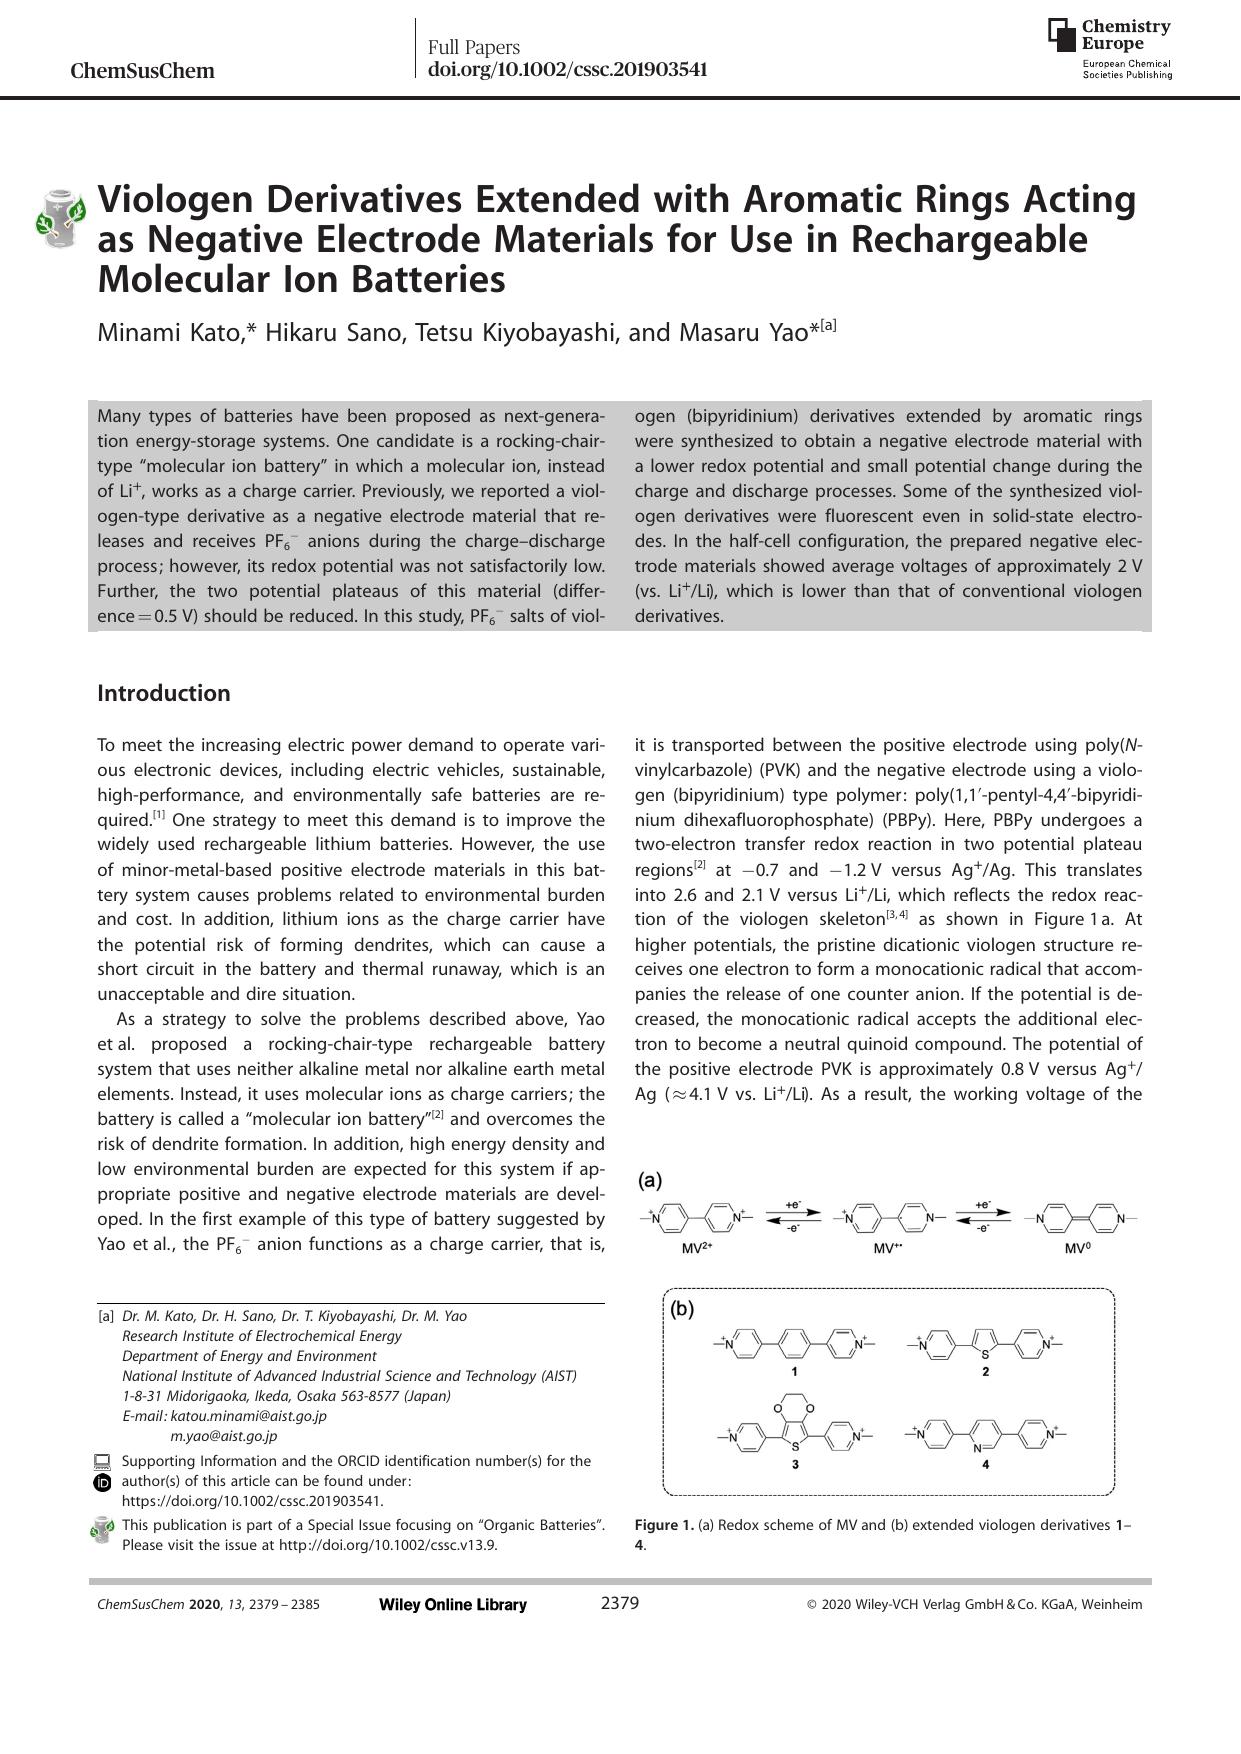 Viologen Derivatives Extended with Aromatic Rings Acting as Negative Electrode Materials for Use in Rechargeable Molecular Ion Batteries by Unknown